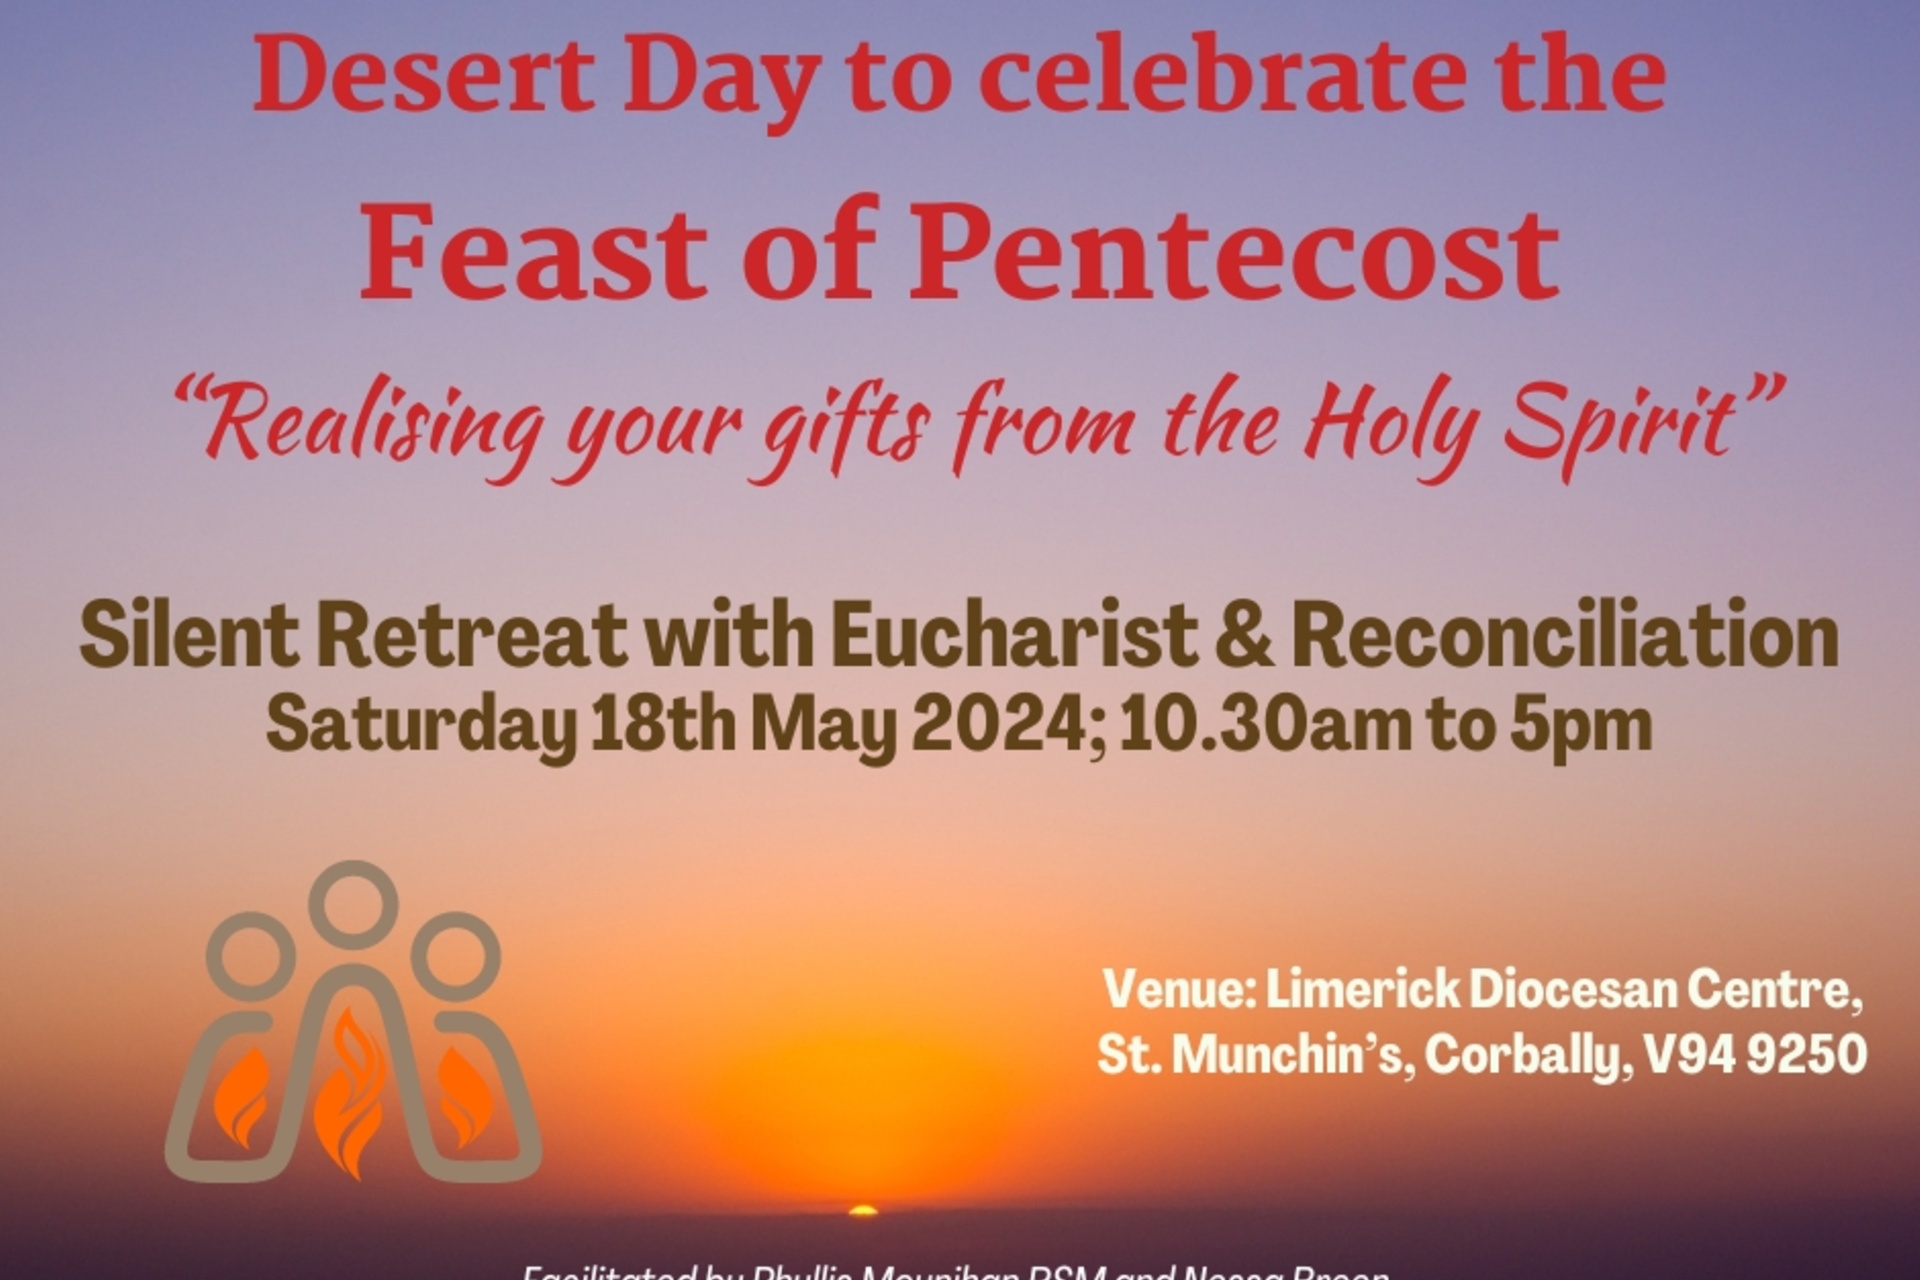 Desert Day to celebrate the feast of Pentecost